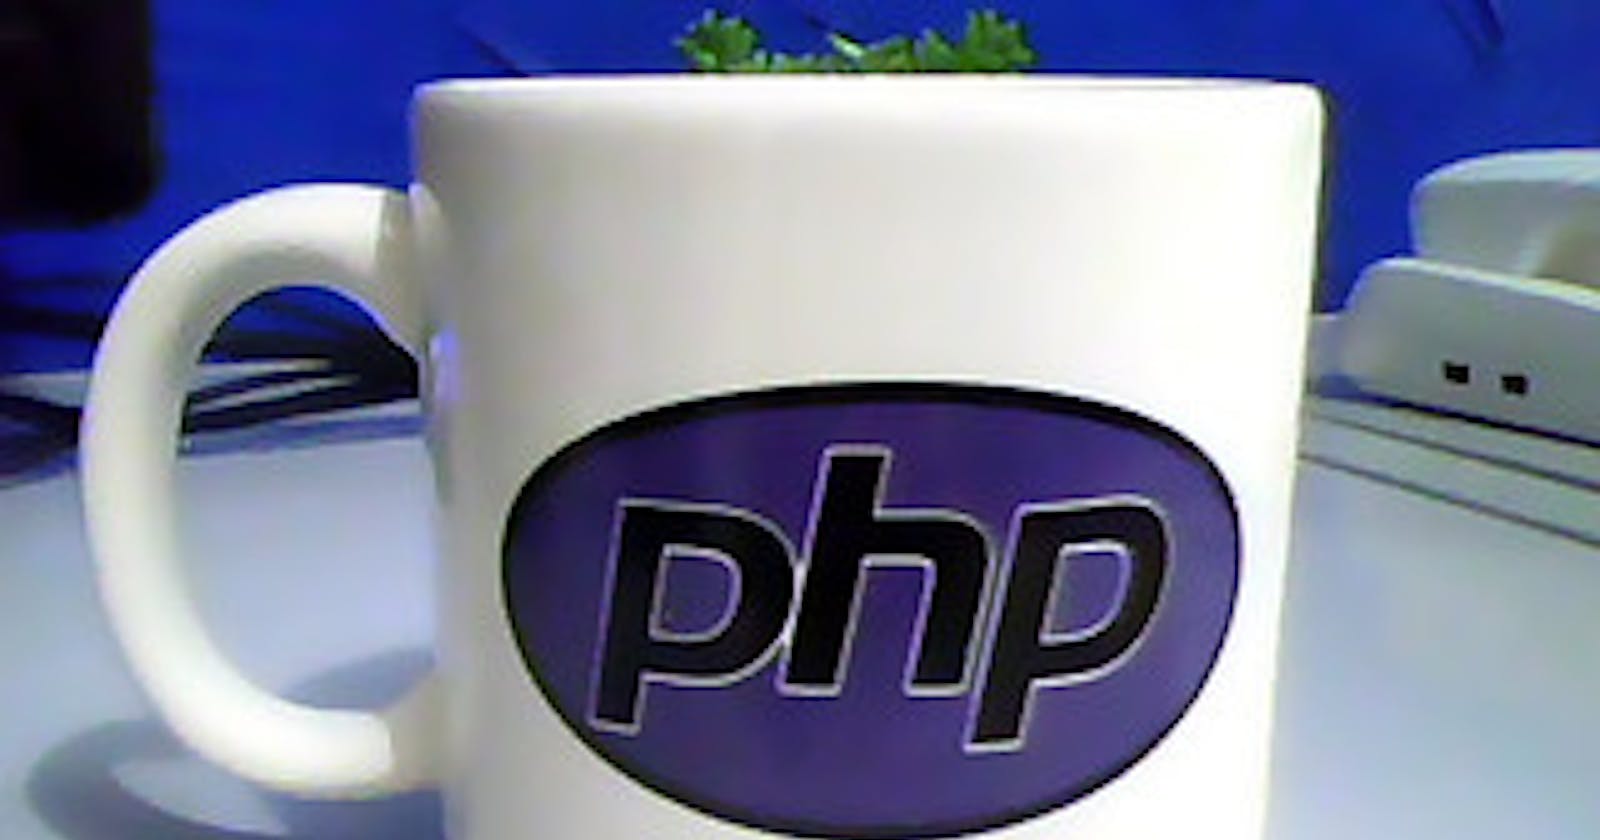 Day 2 - Getting to Know more about PHP Basics.